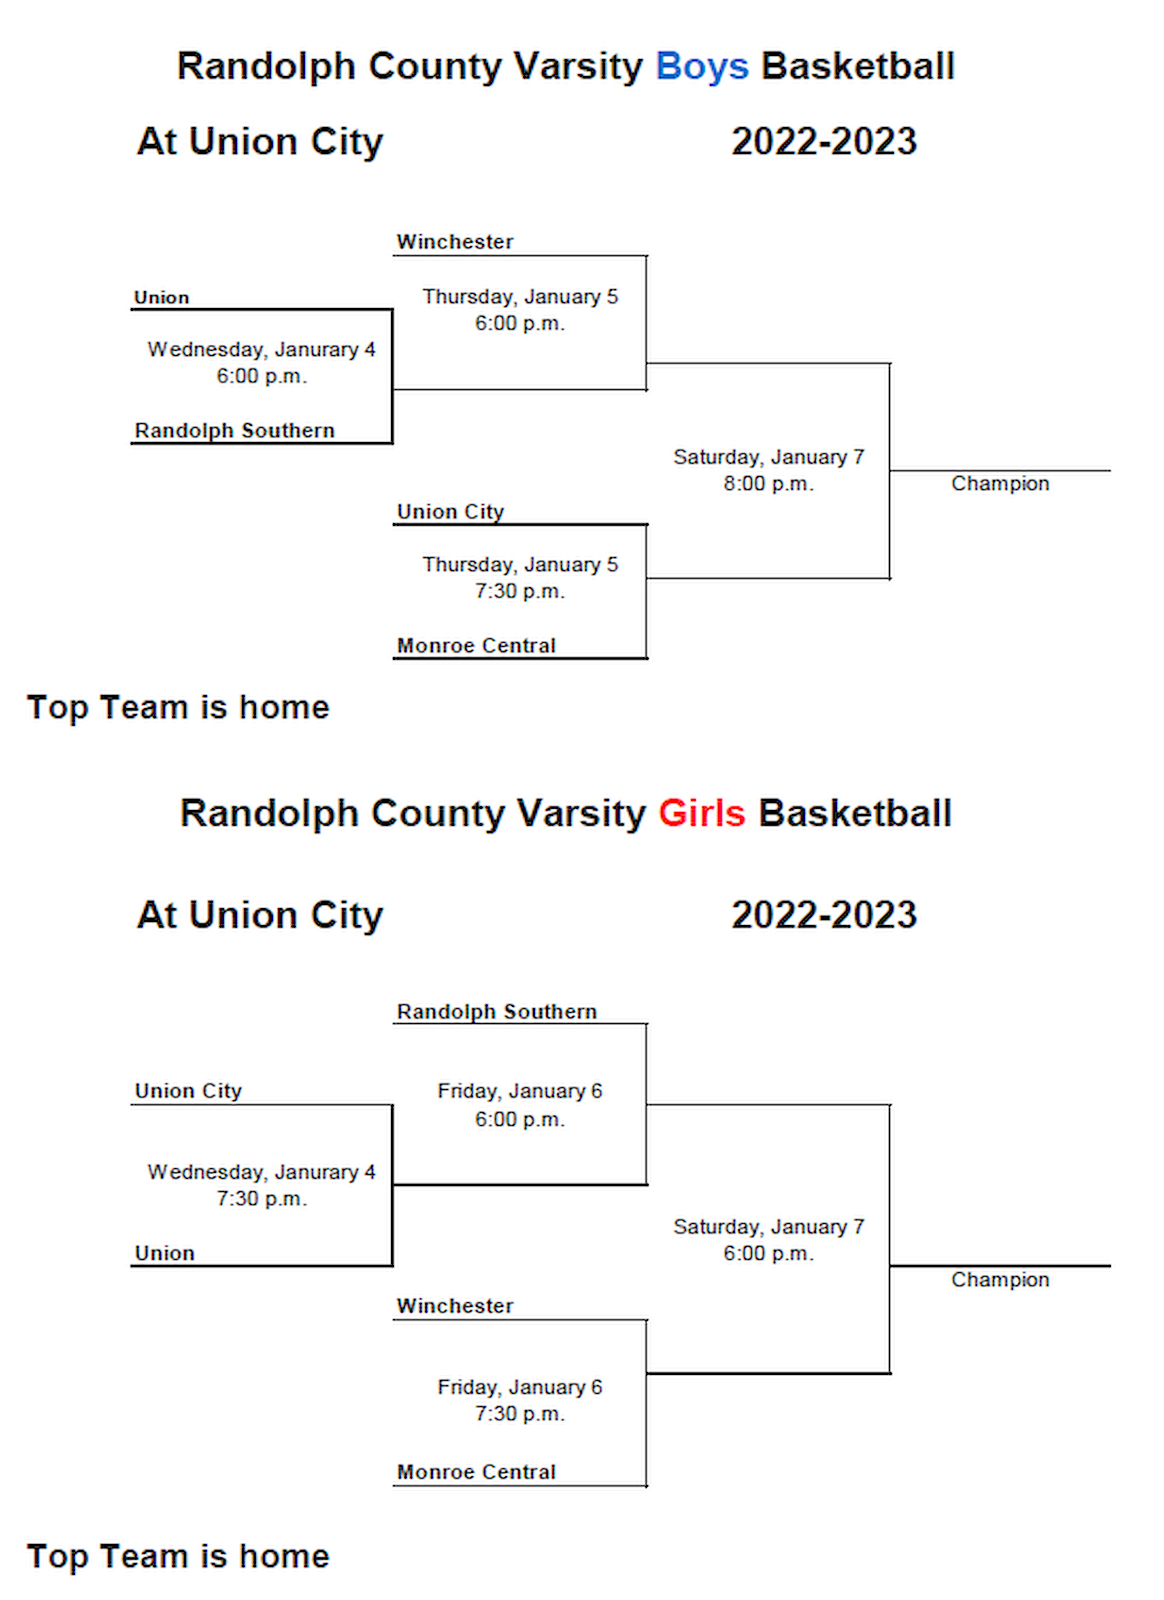 County Tourney at Union City January 4th - 7th cover photo